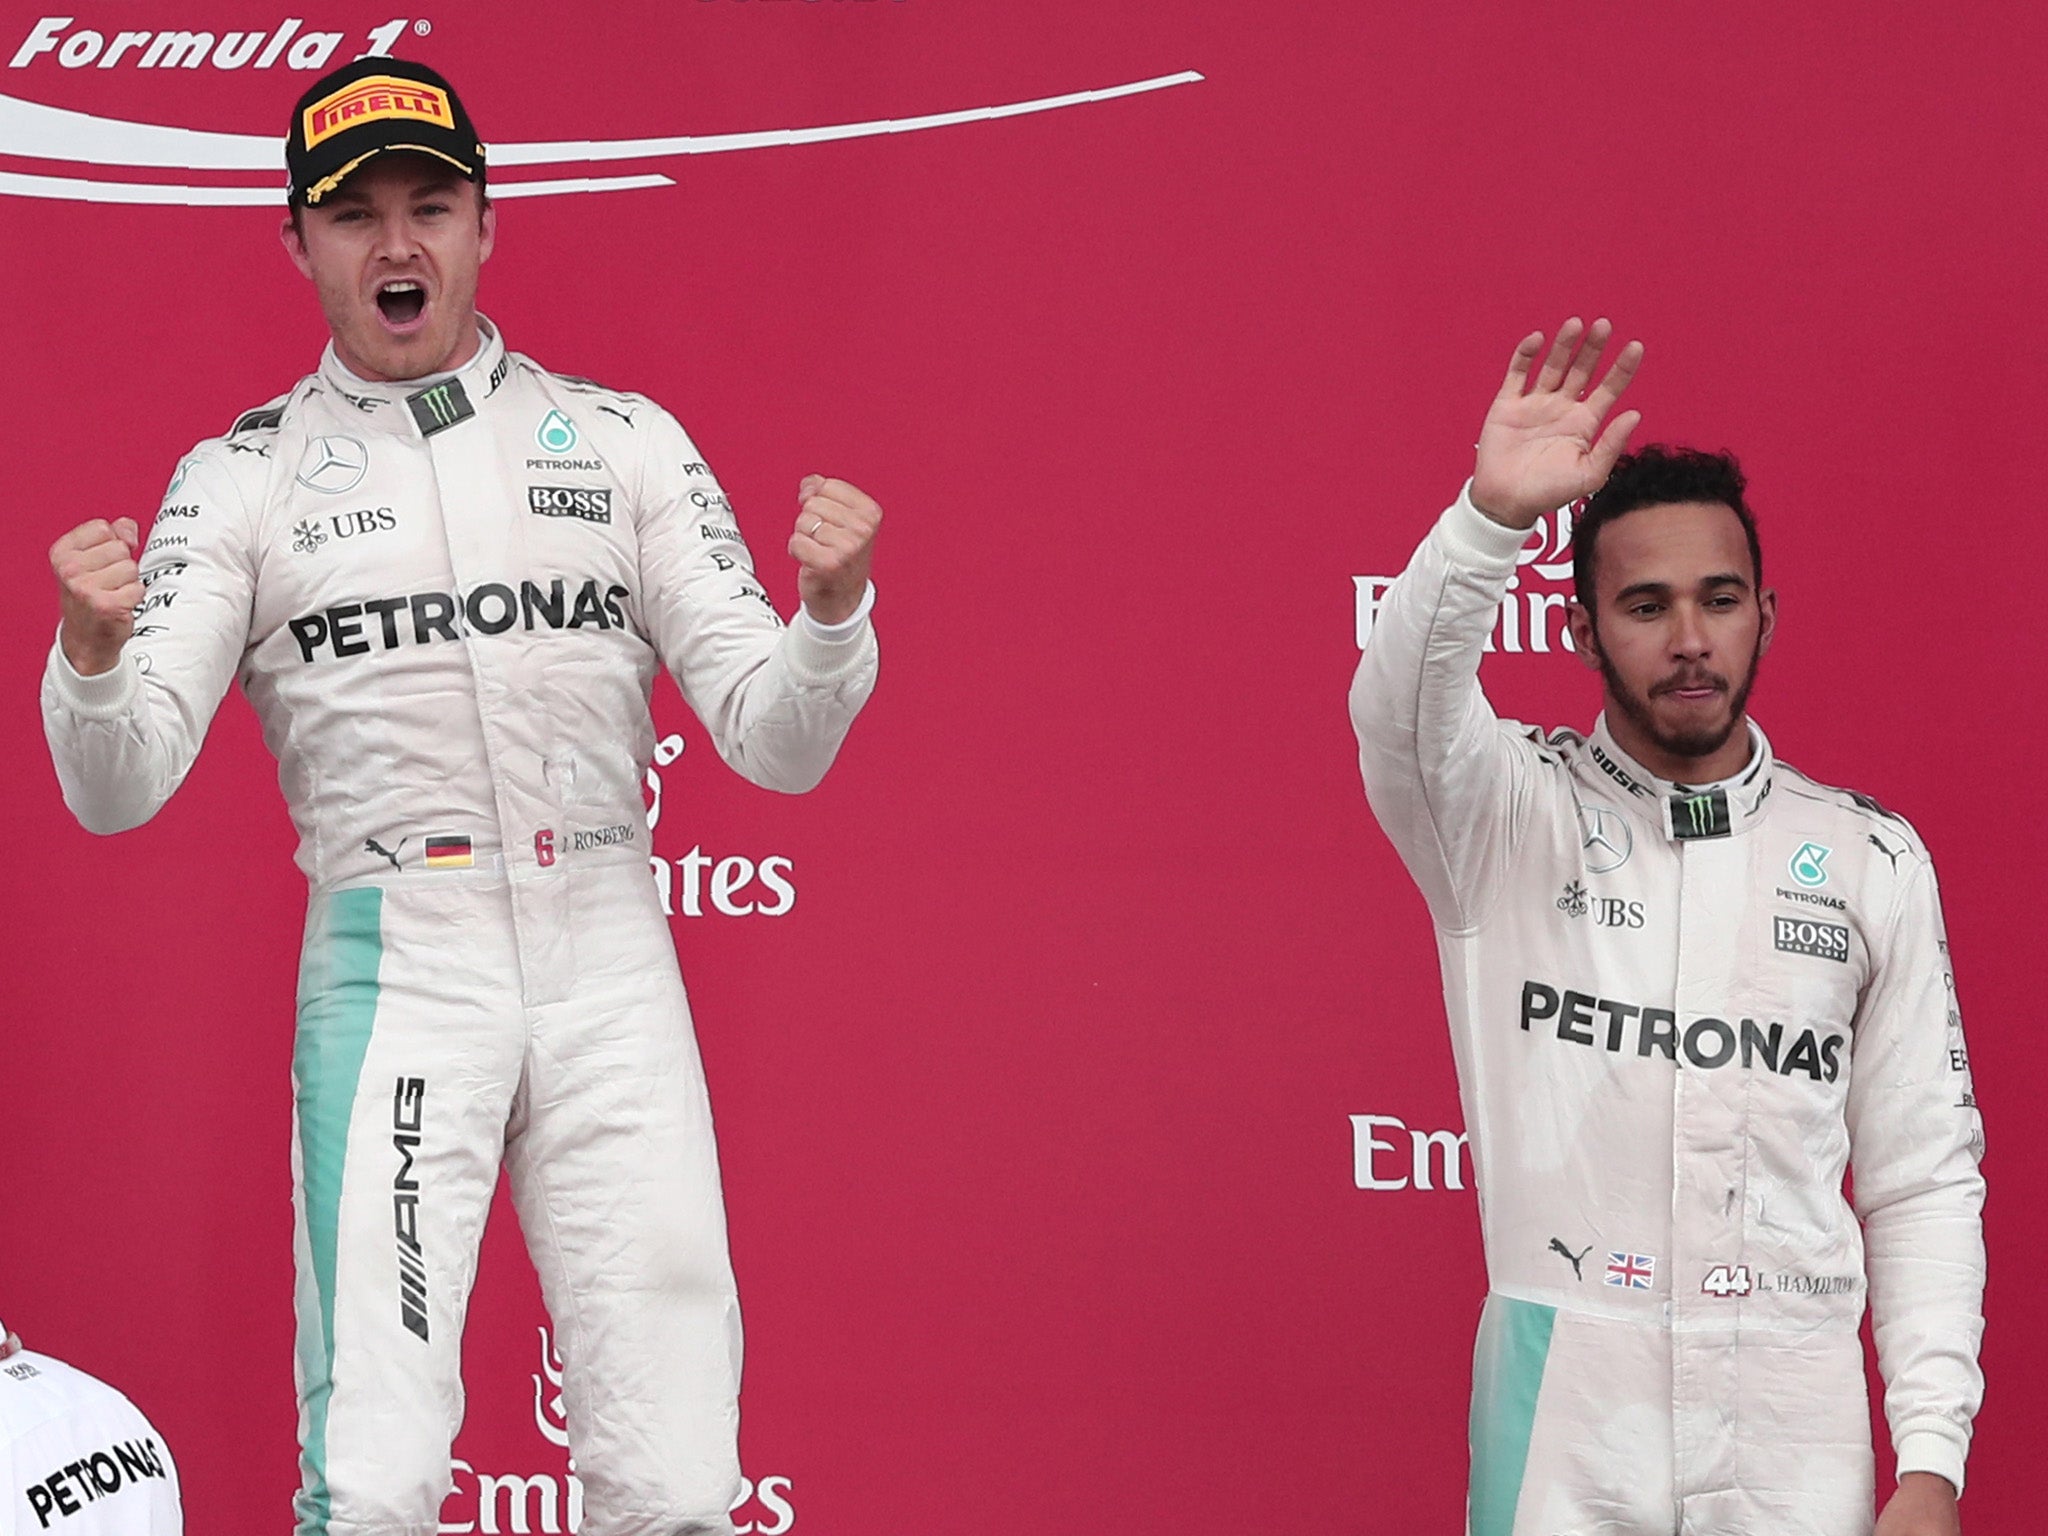 Hamilton finished third behind Rosberg in first in Japan